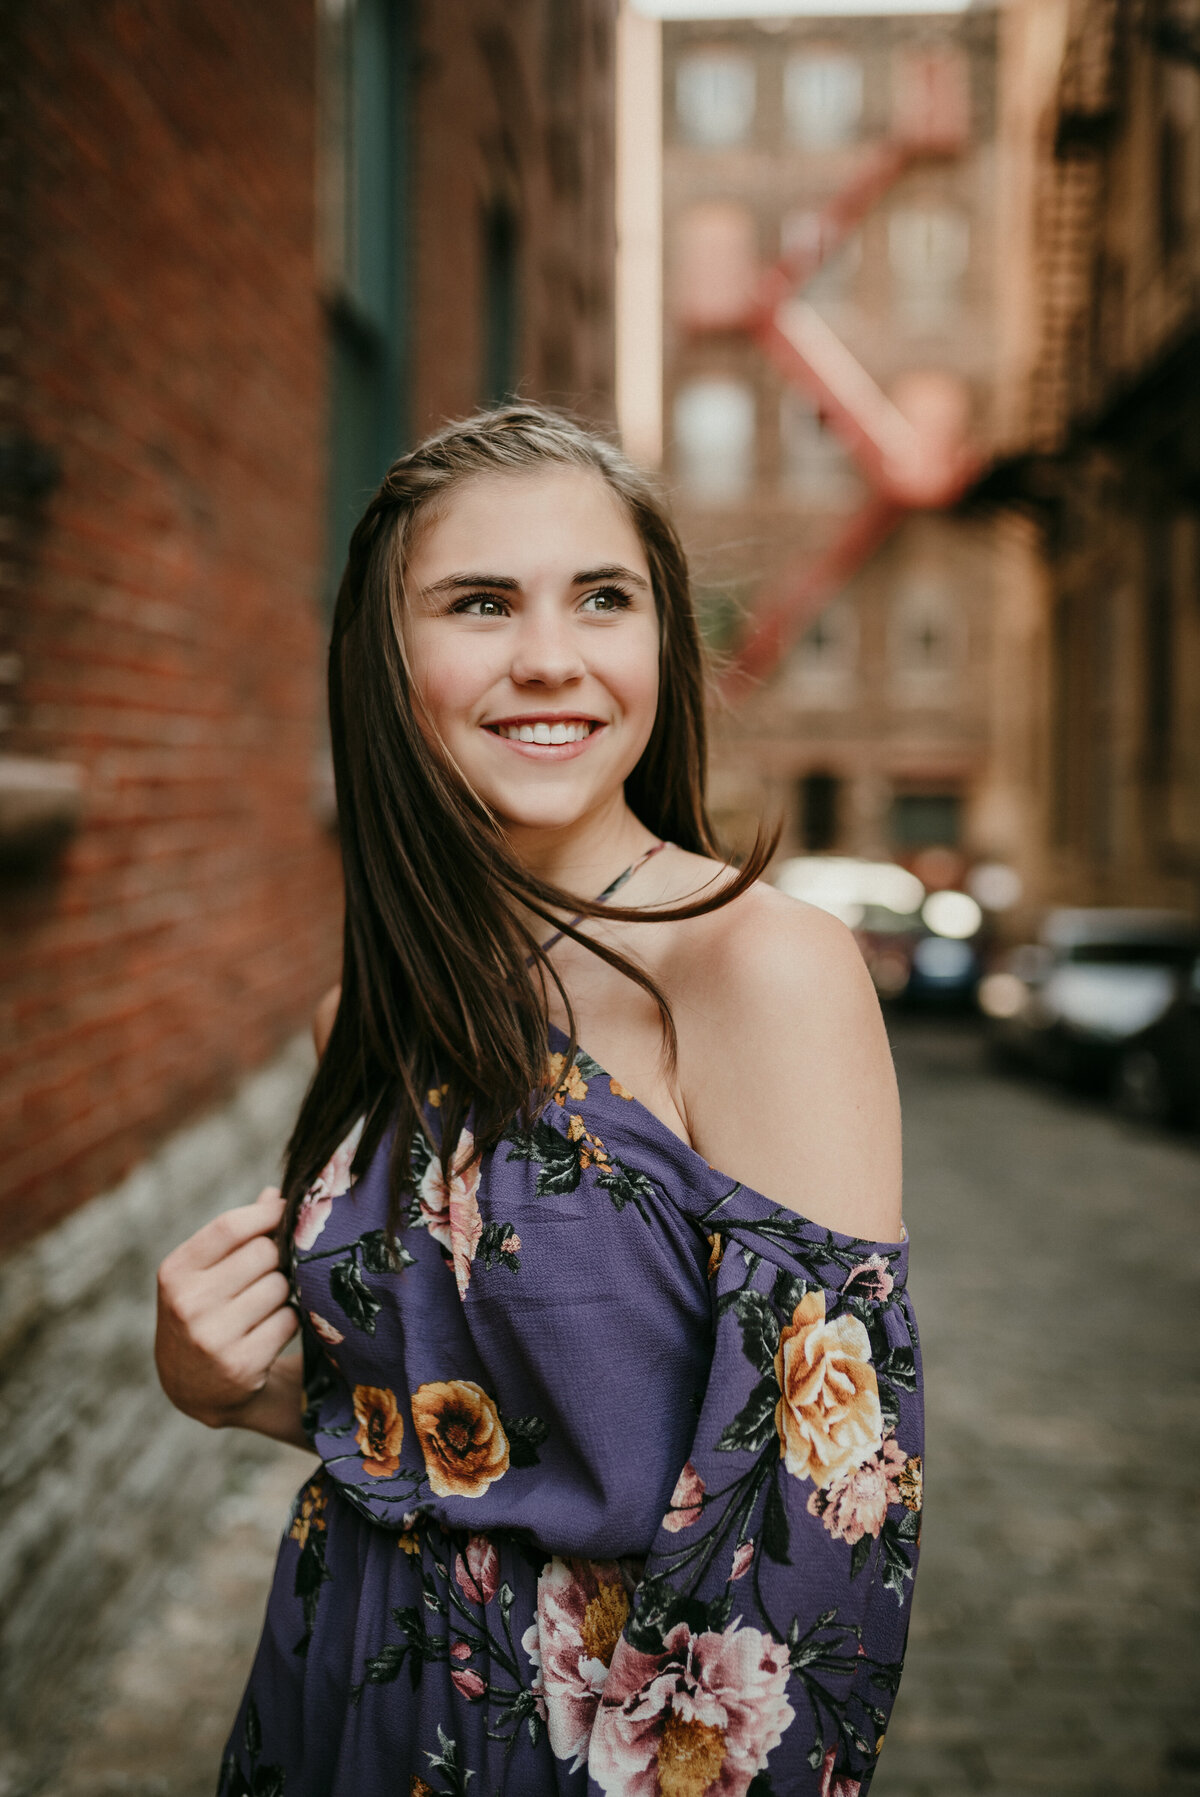 Discover the hidden charm of St. Paul with senior portraits in urban alleys. Shannon Kathleen Photography turns cityscapes into frames for your unique story. Schedule your alley-inspired session.